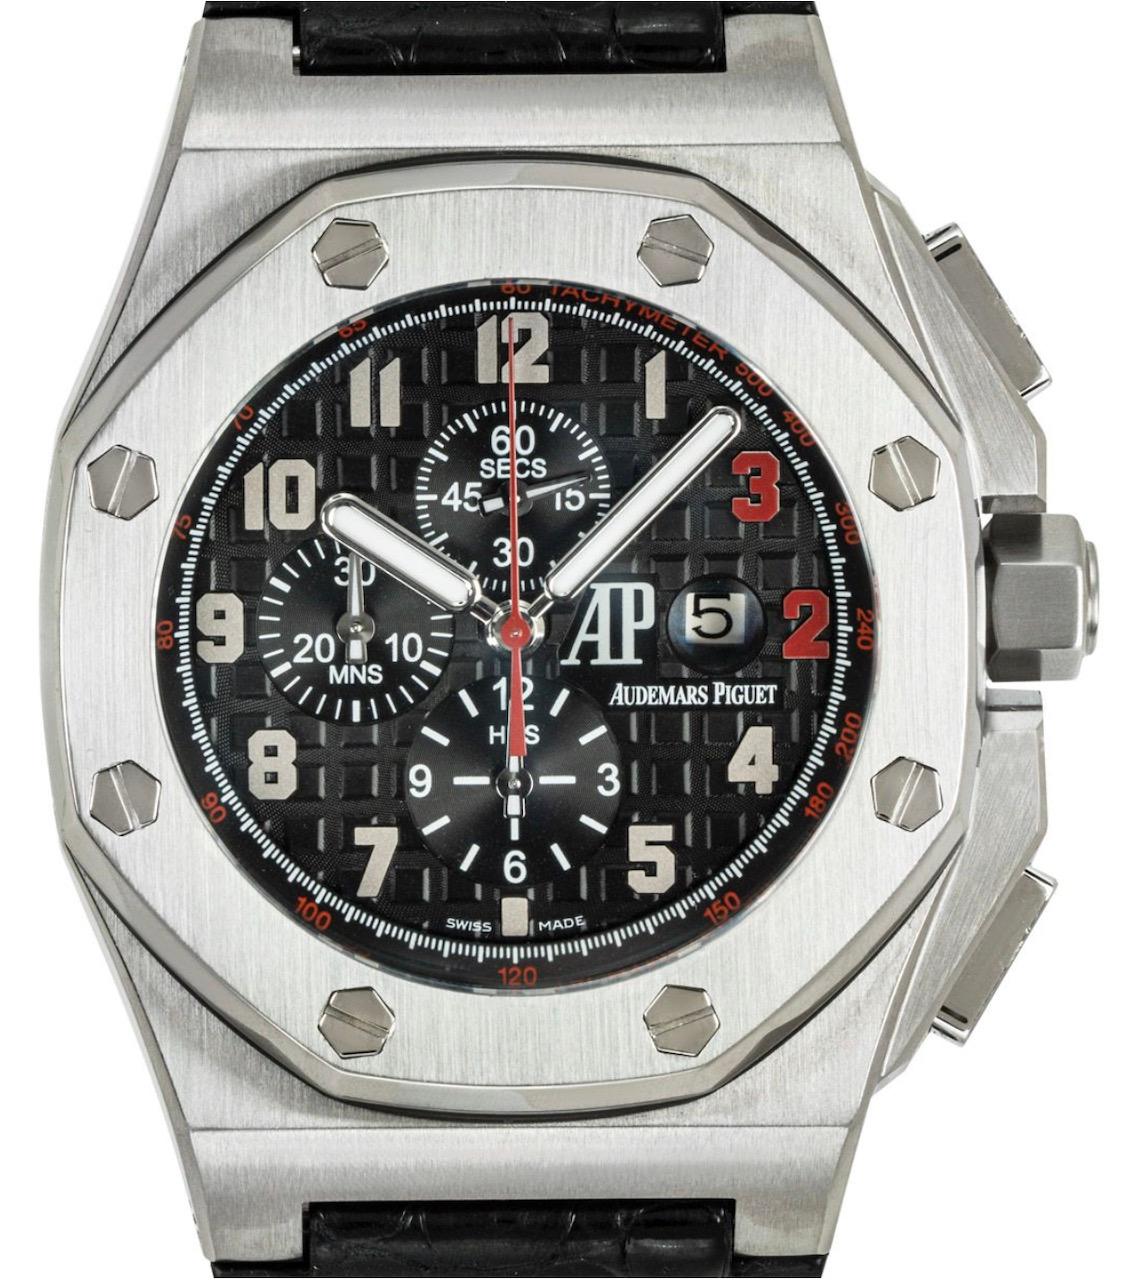 A limited edition 48mm Royal Oak Offshore Shaquille O'Neal wristwatch by Audemars Piguet. Featuring a black dial with arabic numbers, 3 & 2 are coloured in red to reflect the basketball players' jersey number. The watch further features a date